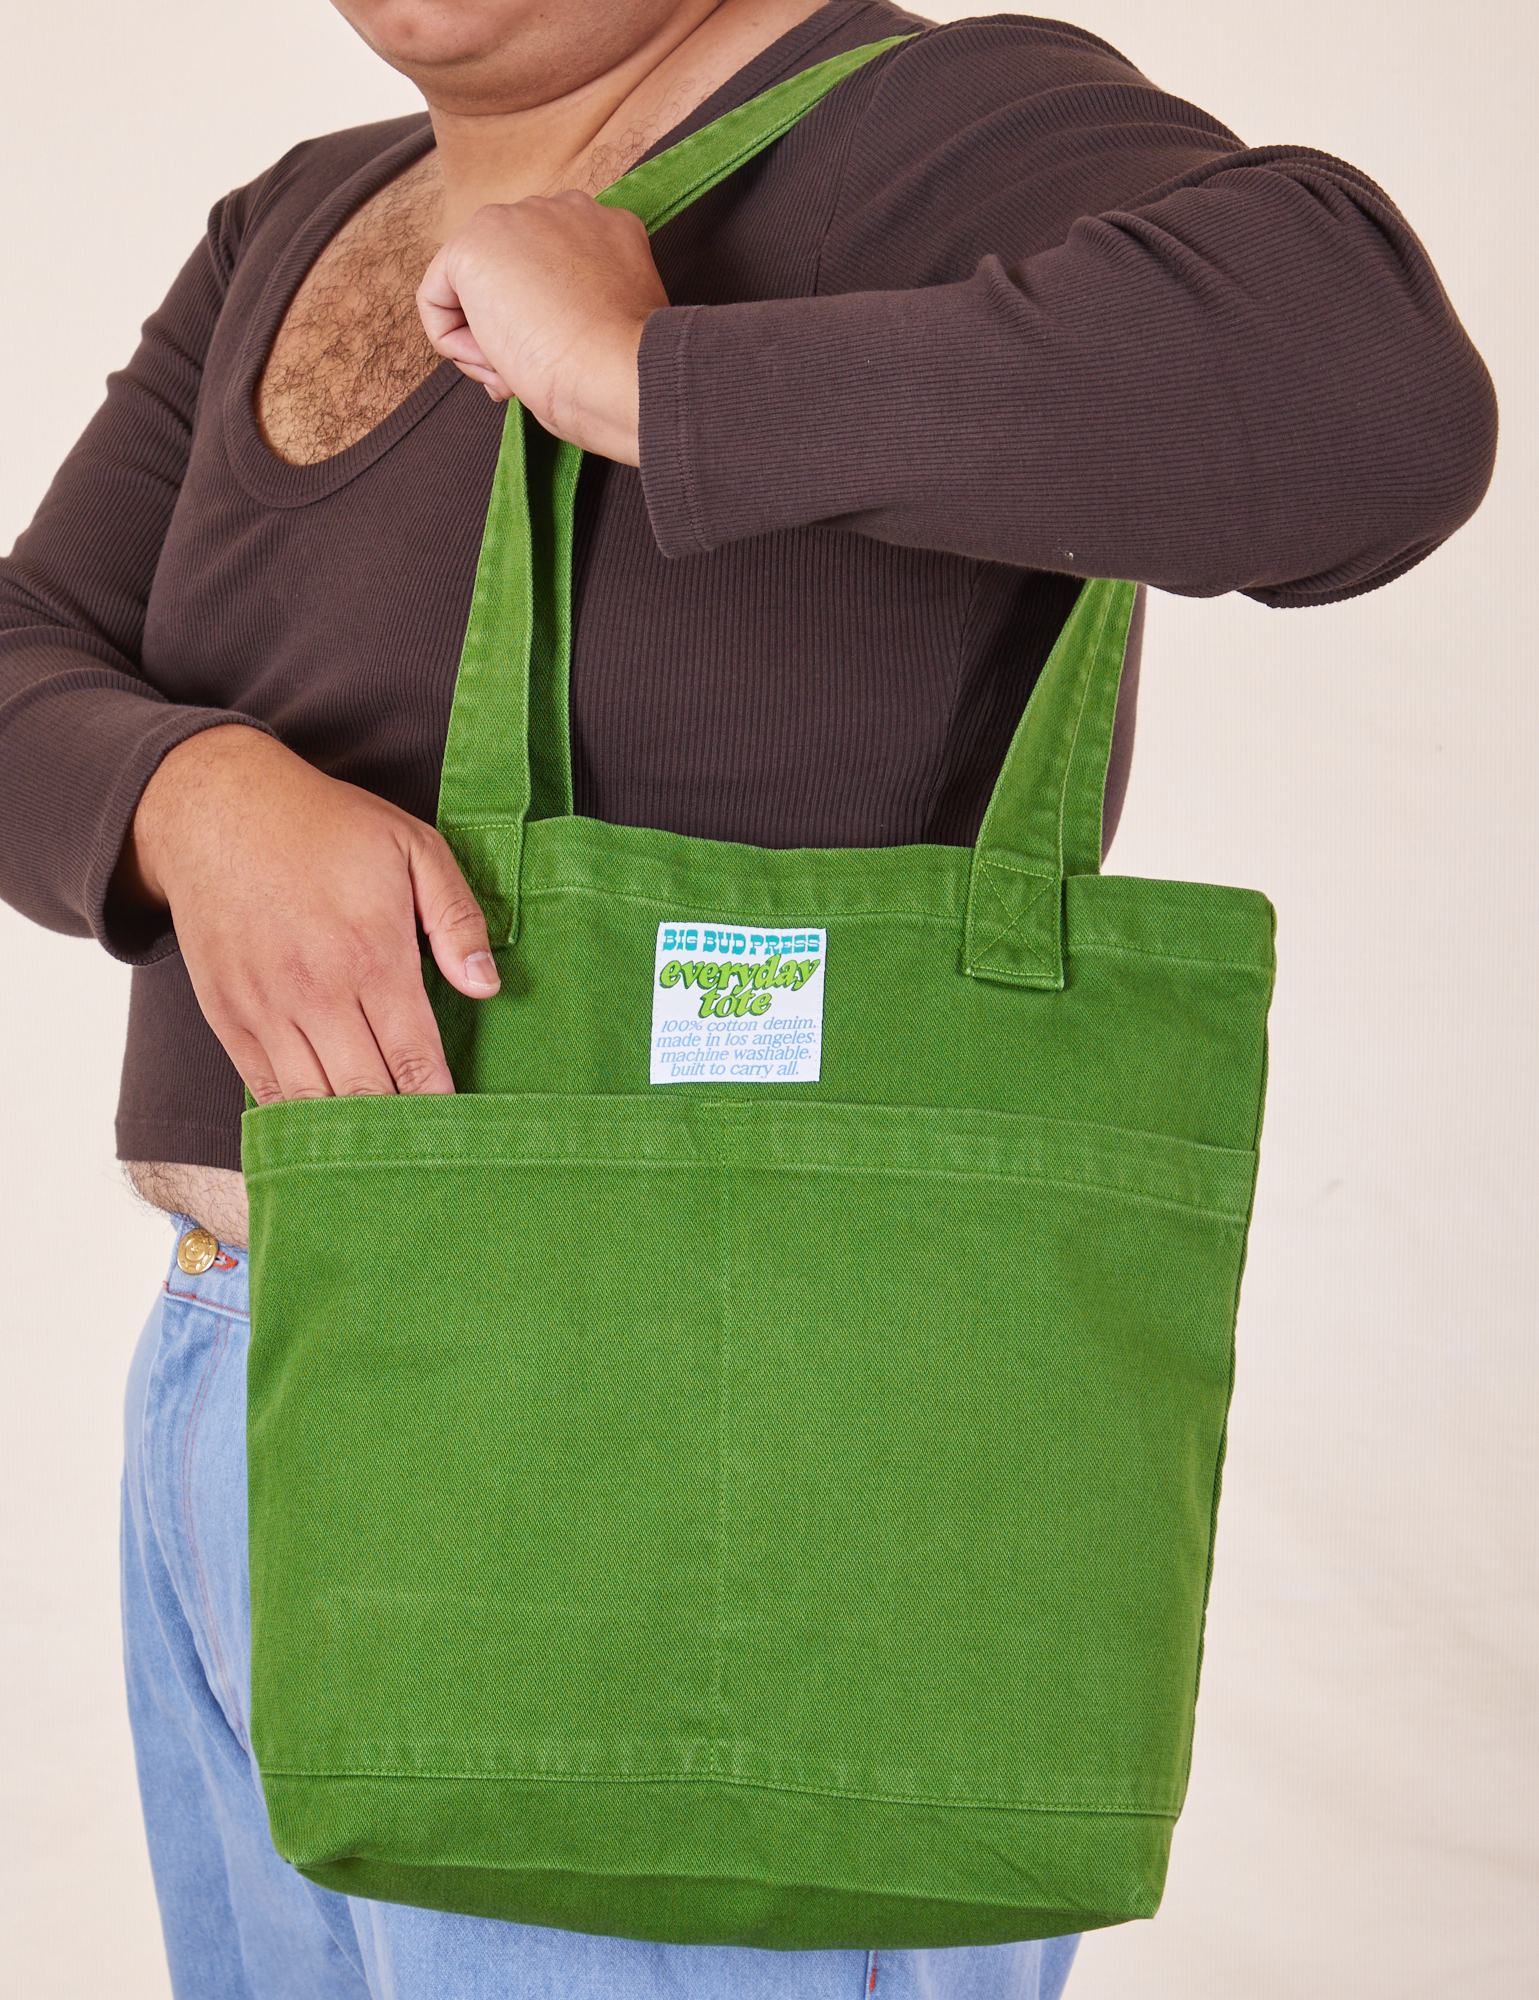 Everyday Tote Bag in Lawn Green worn by model